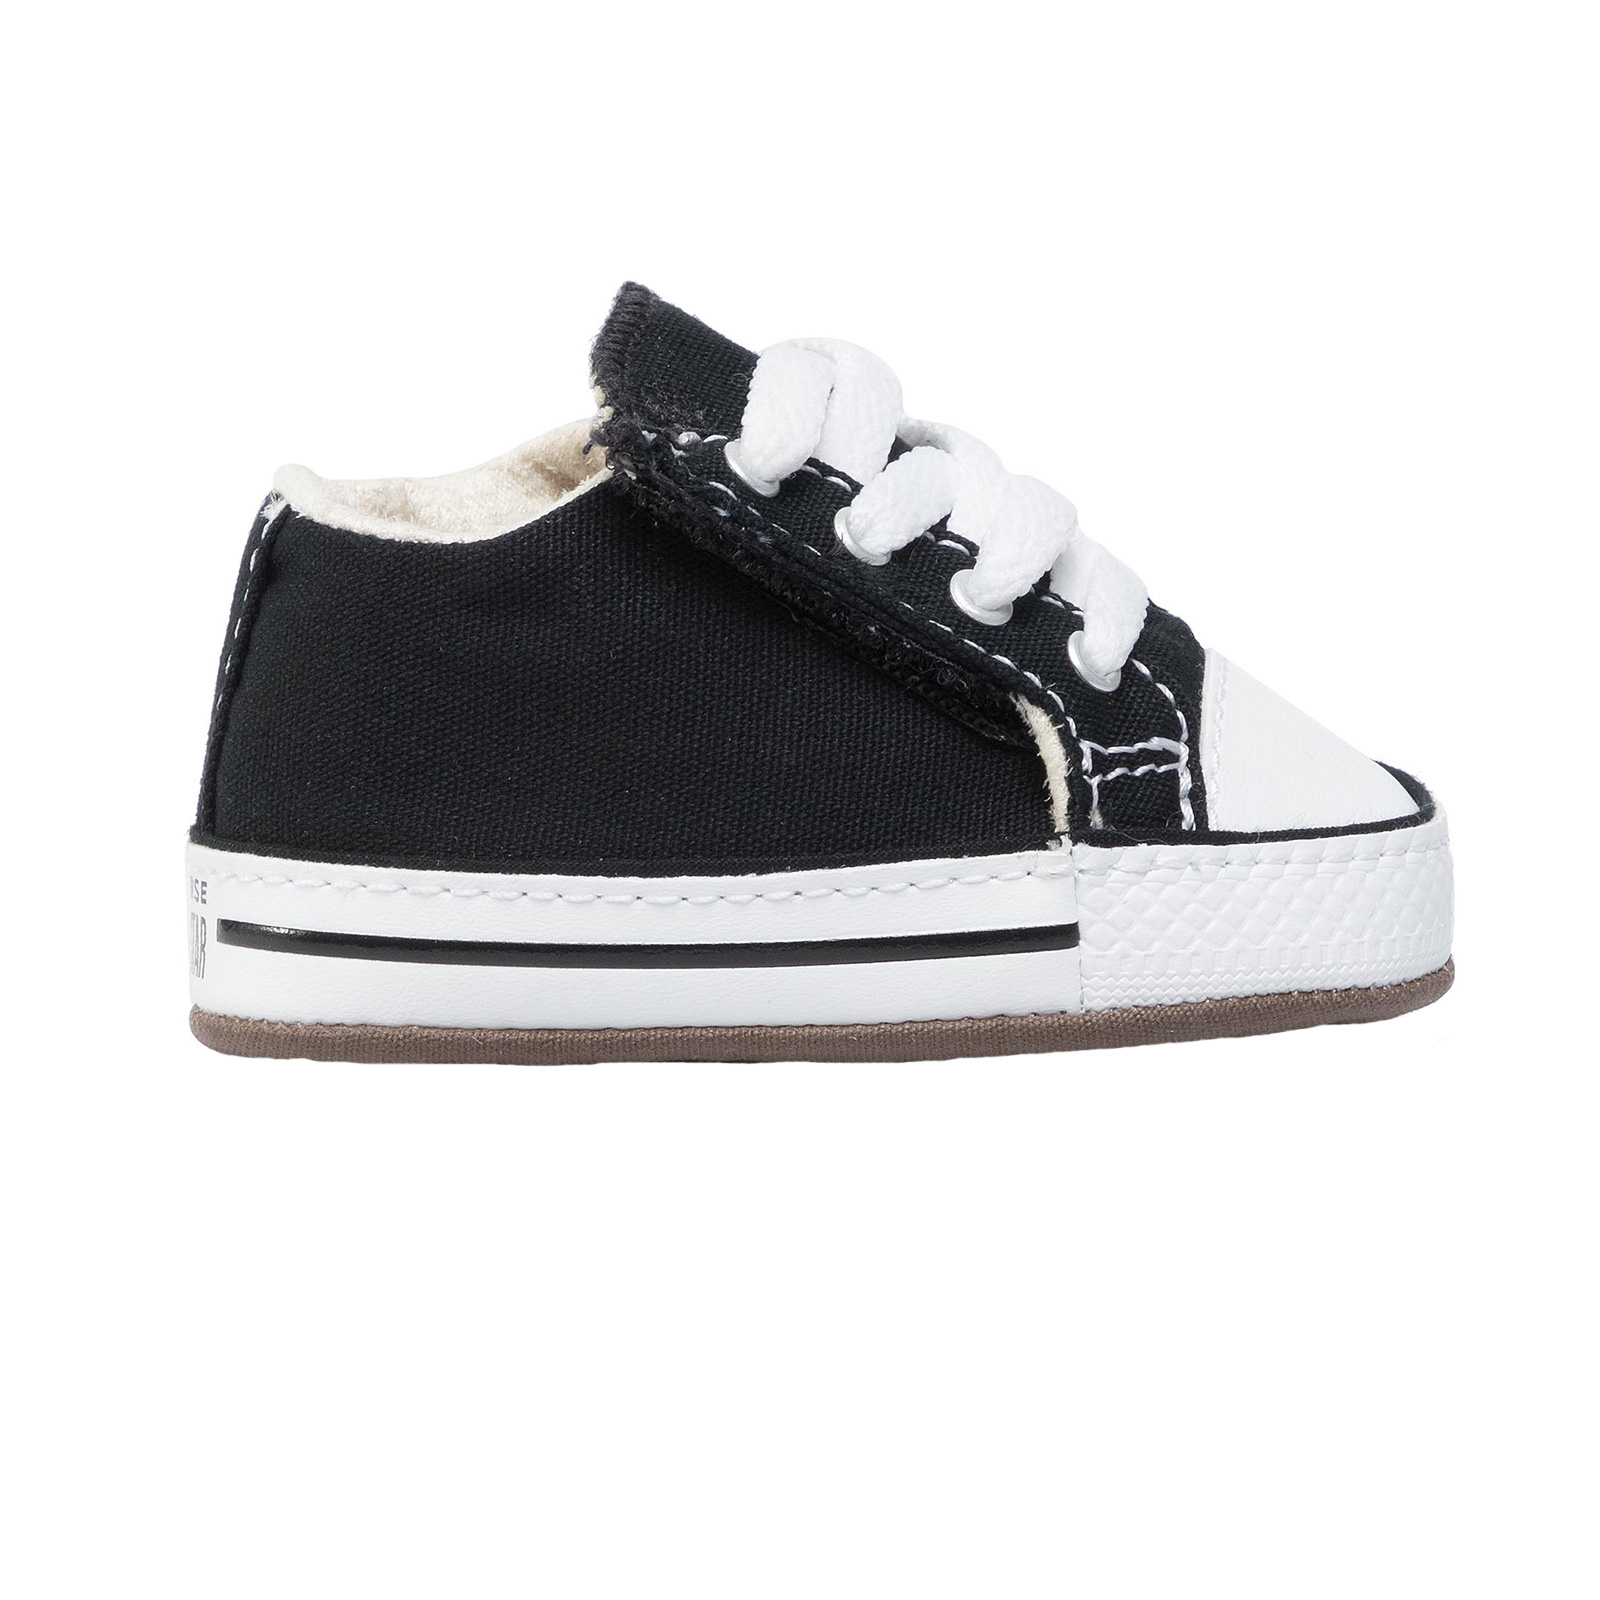 Converse - CHUCK TAYLOR ALL STAR CRIBSTER CANVAS COLOR - 001-BLACK/NATURAL IVORY/WHITE Παιδικά > Παπούτσια > Sneaker > Παπούτσι Low Cut